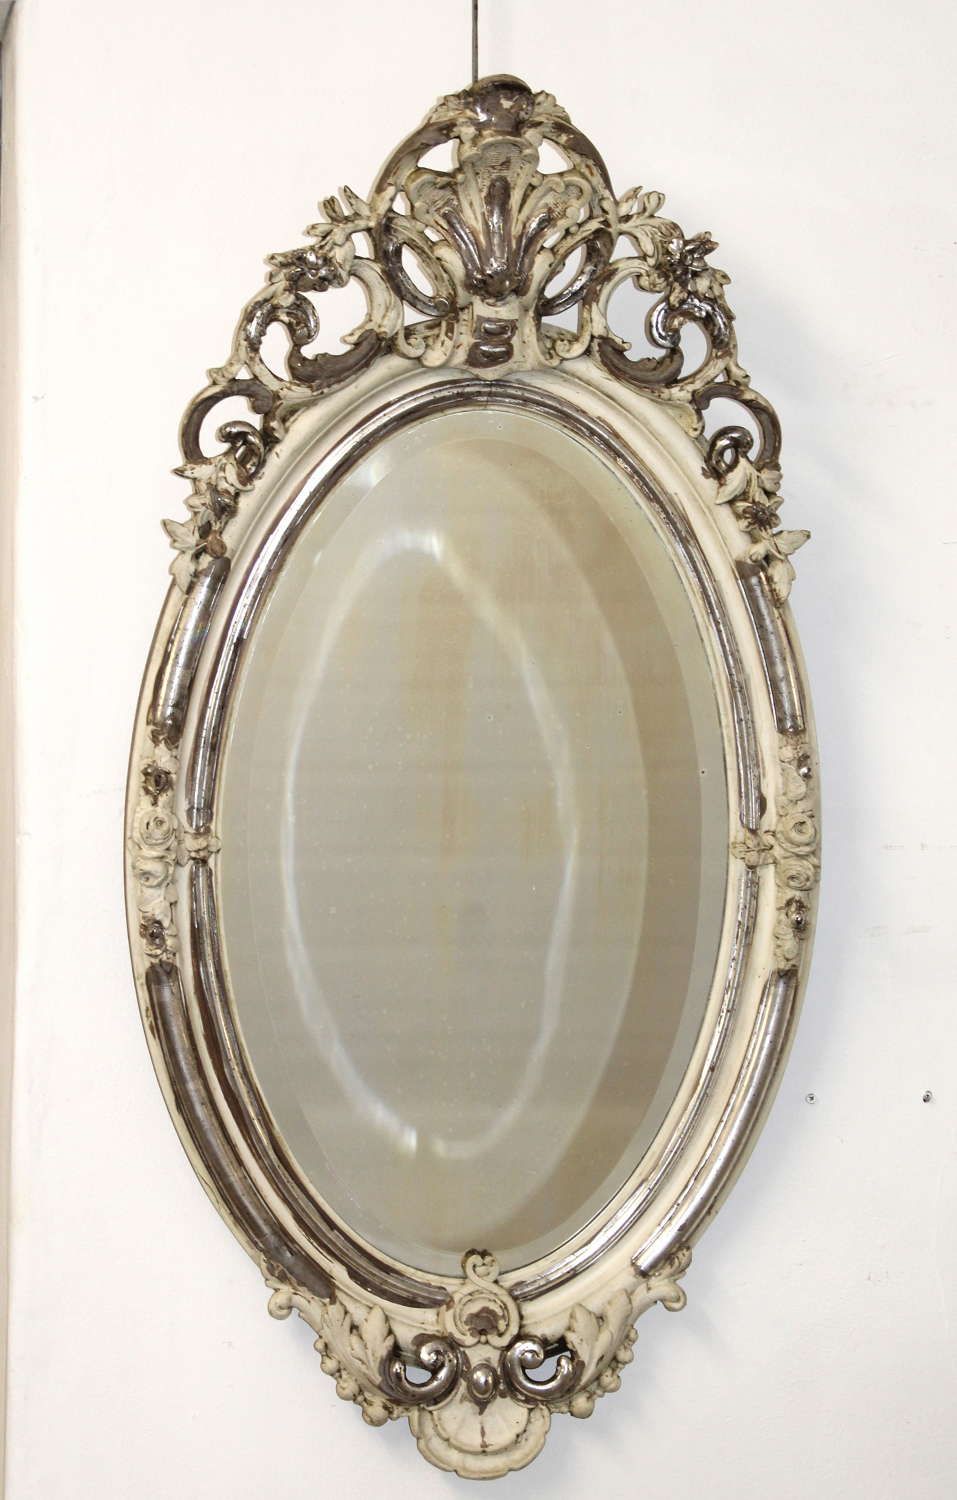 Vintage Silver And Cream Oval Mirror Regarding Antique Silver Oval Wall Mirrors (View 7 of 15)